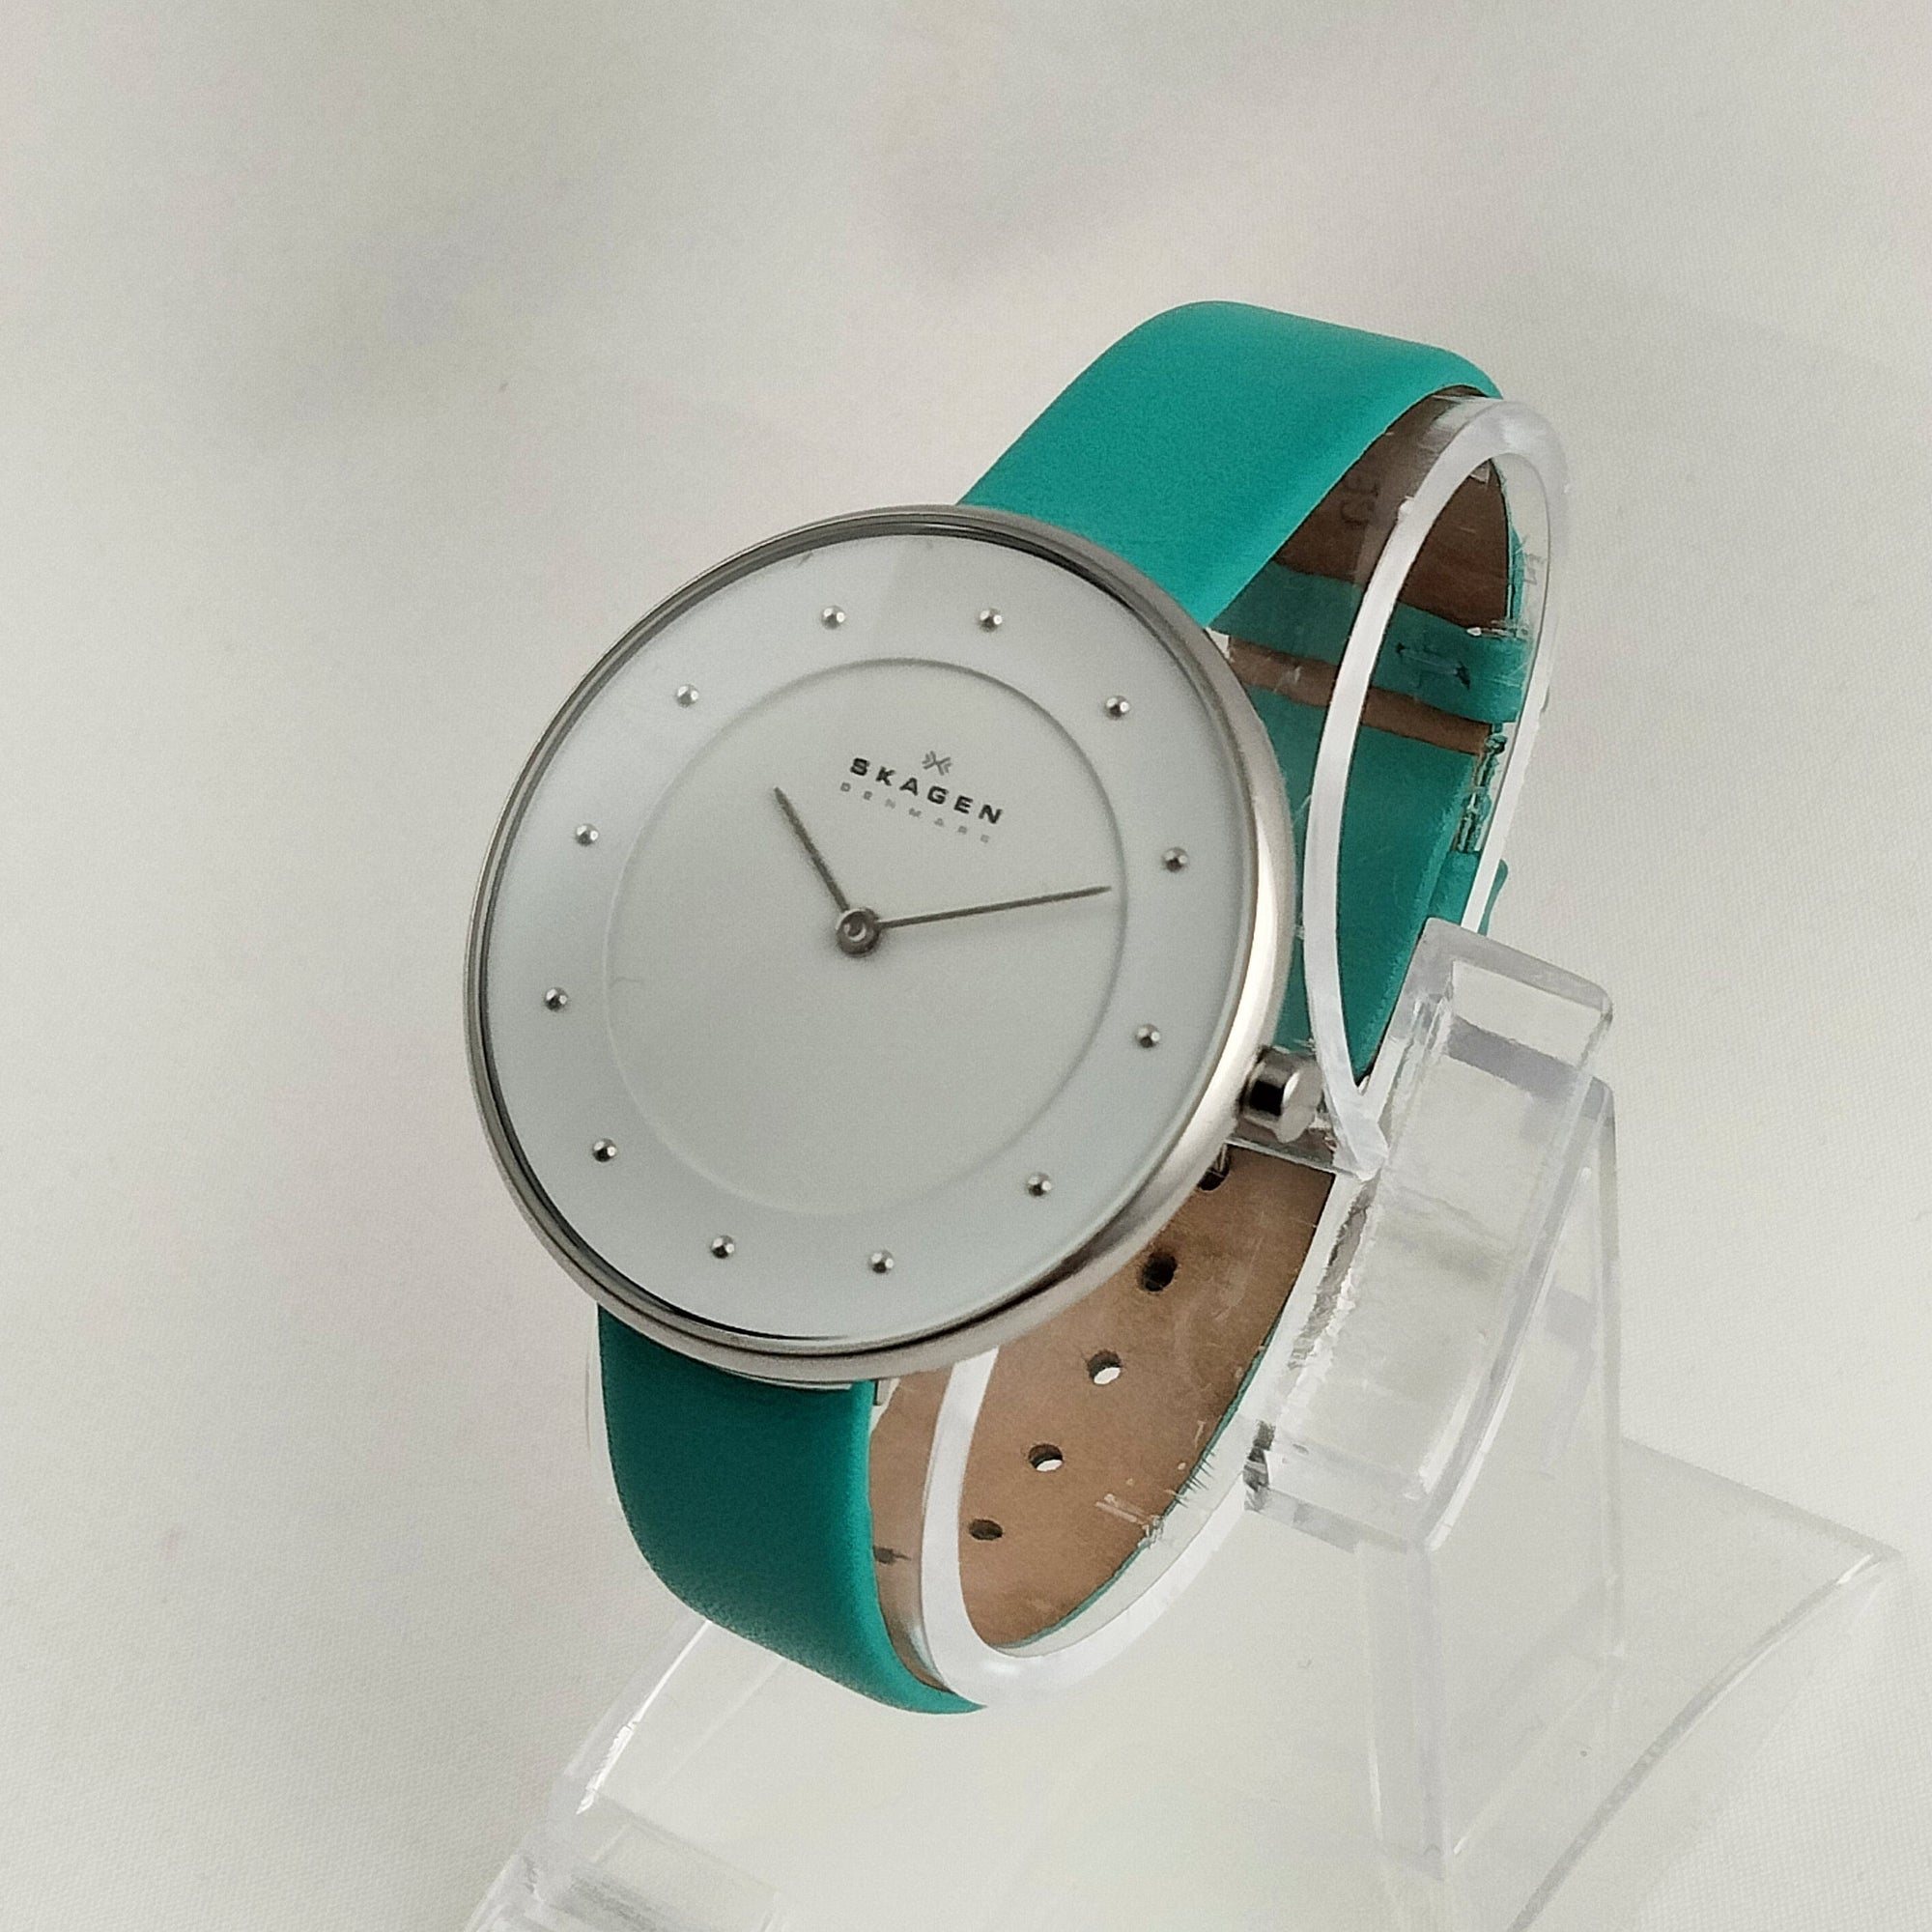 I Like Mikes Mid Century Modern Watches Skagen Unisex Stainless Steel Oversized Watch, Dot Hour Markers, Turquoise Genuine Leather Strap